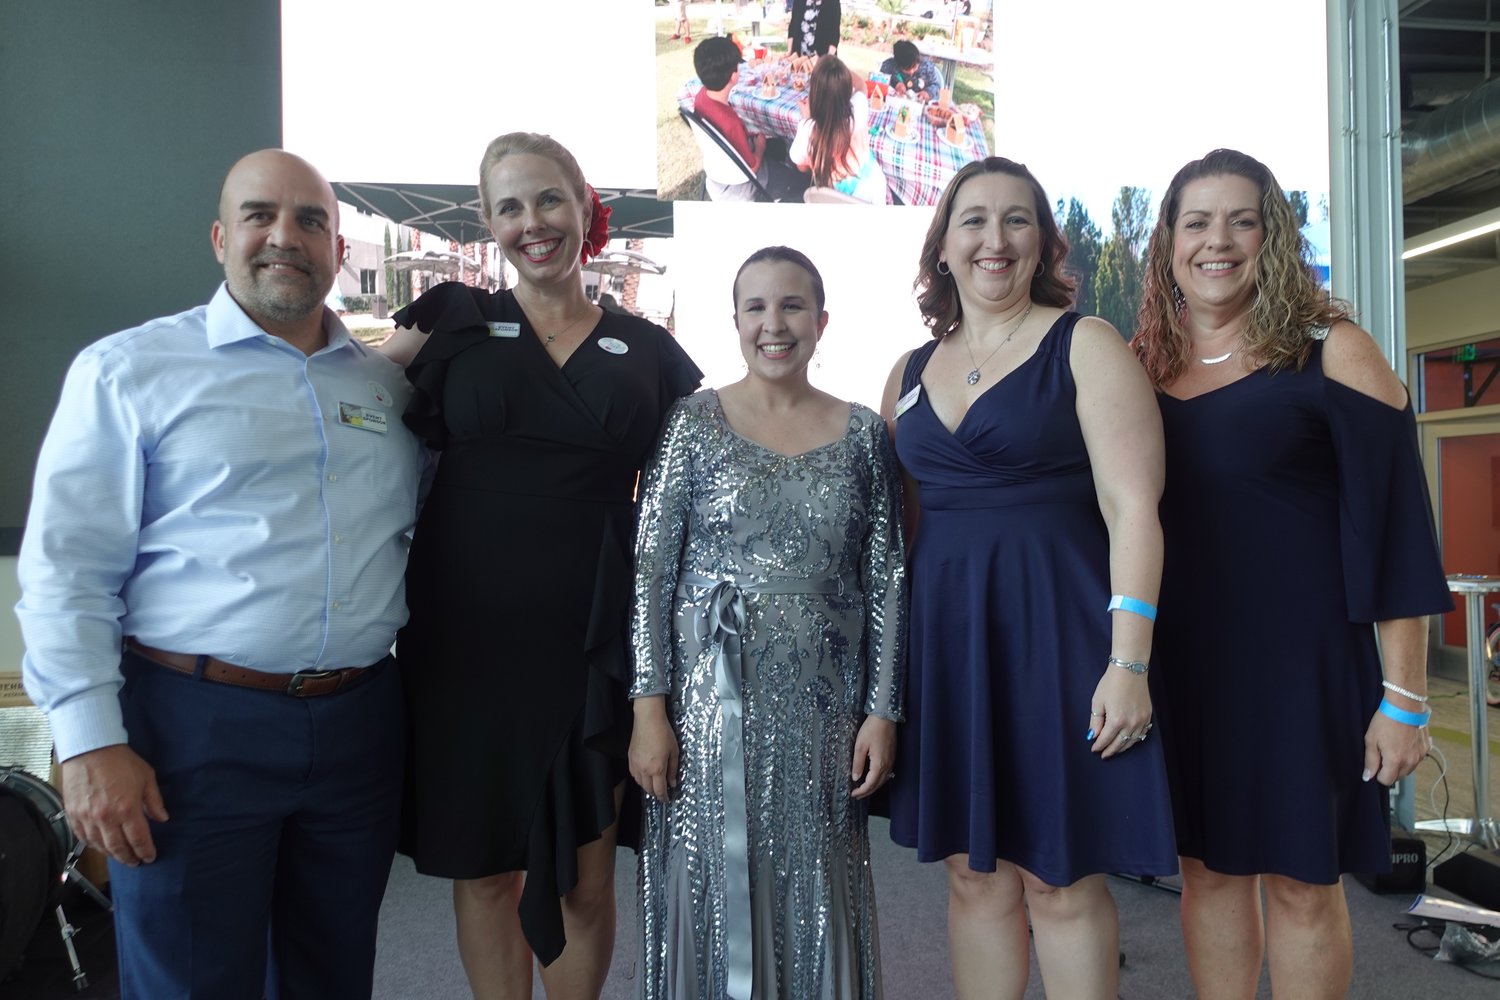 The Fostering Connections executive team: Rob Thomas (board chair), Stephanie McFee (vice chair), Founder and CEO Aubrie Simpson-Gotham, Amanda Bunk-Sizemore (treasurer) and Donna Wagner (secretary).